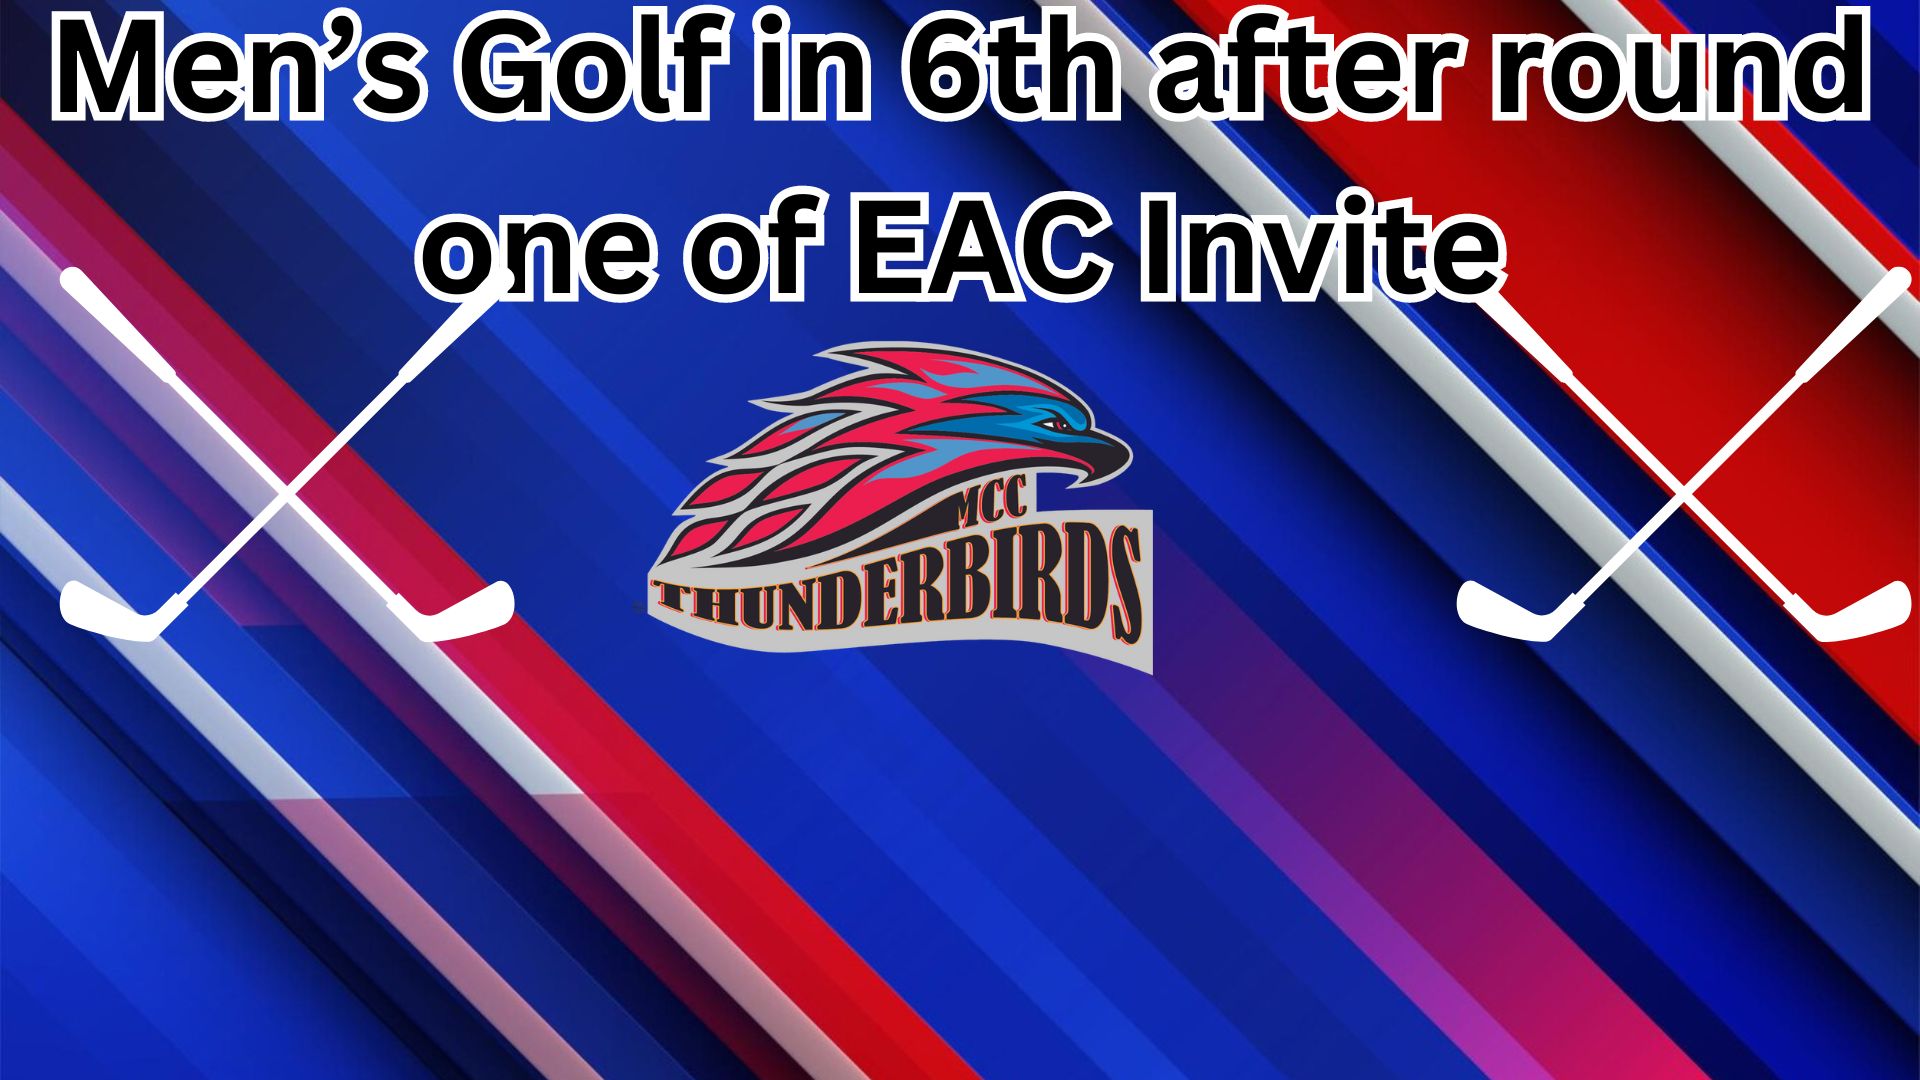 Men’s golf In 6th at EAC Invite